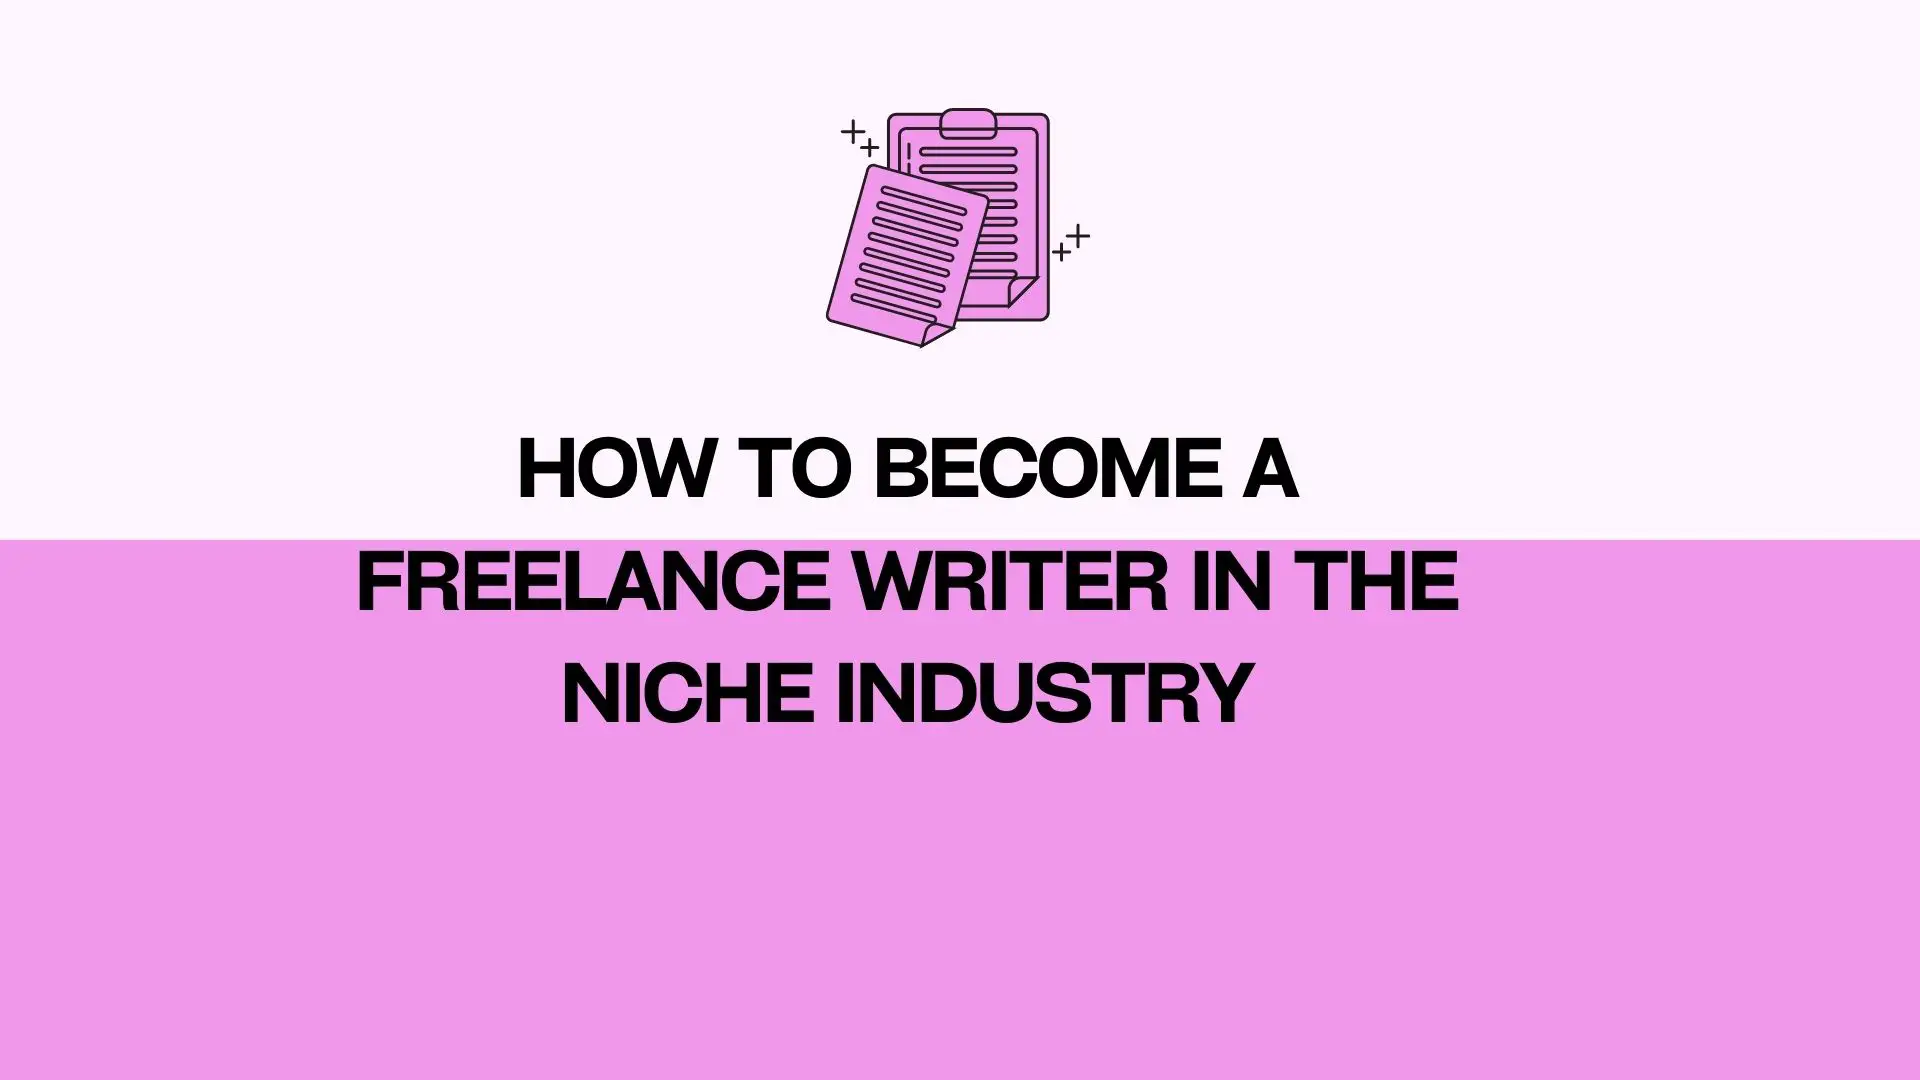 How To Become A Freelance Writer In The Niche Industry